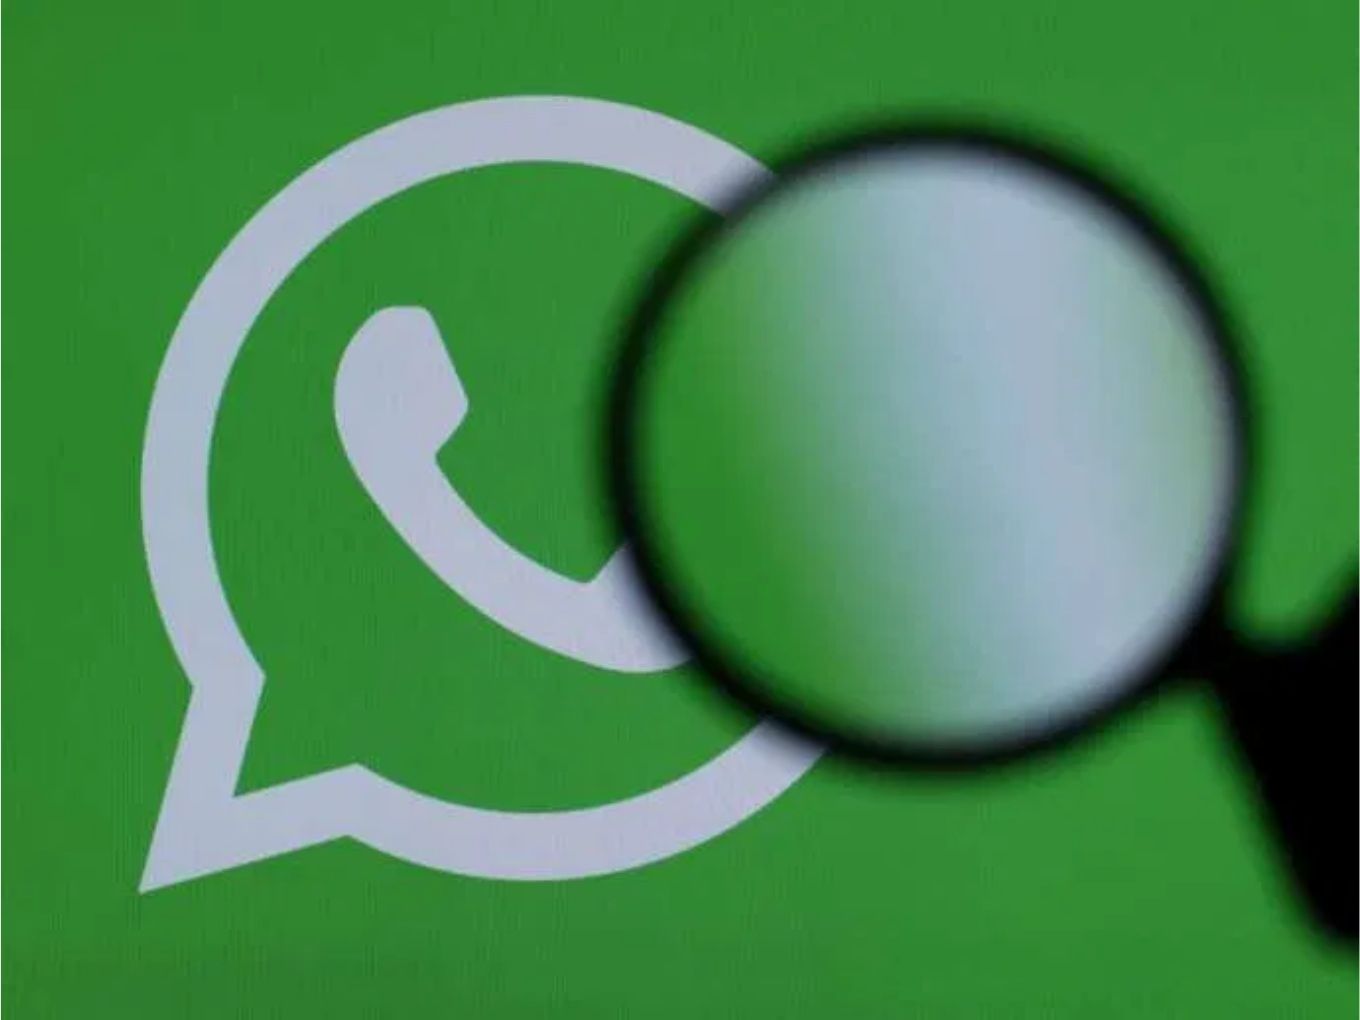 WhatsApp Says It Informed Govt About Pegasus In September Too